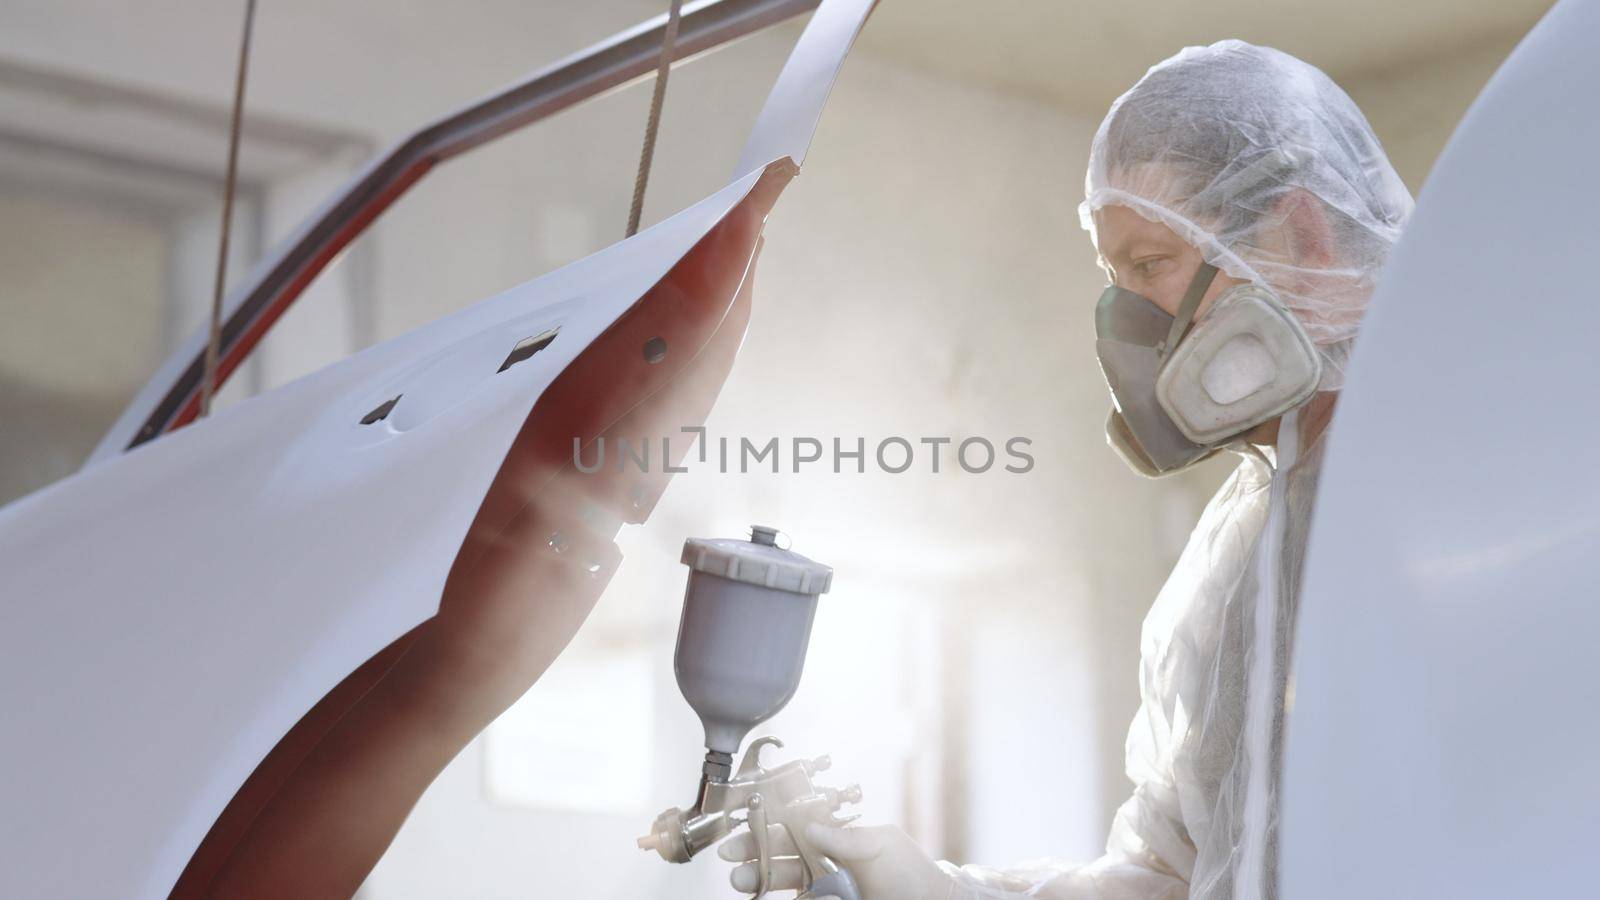 Car manufacturing factory. Painting Spray Paint vehicle parts at car service workshop. Industrial spray painting process. Man painting a car in a body shop.